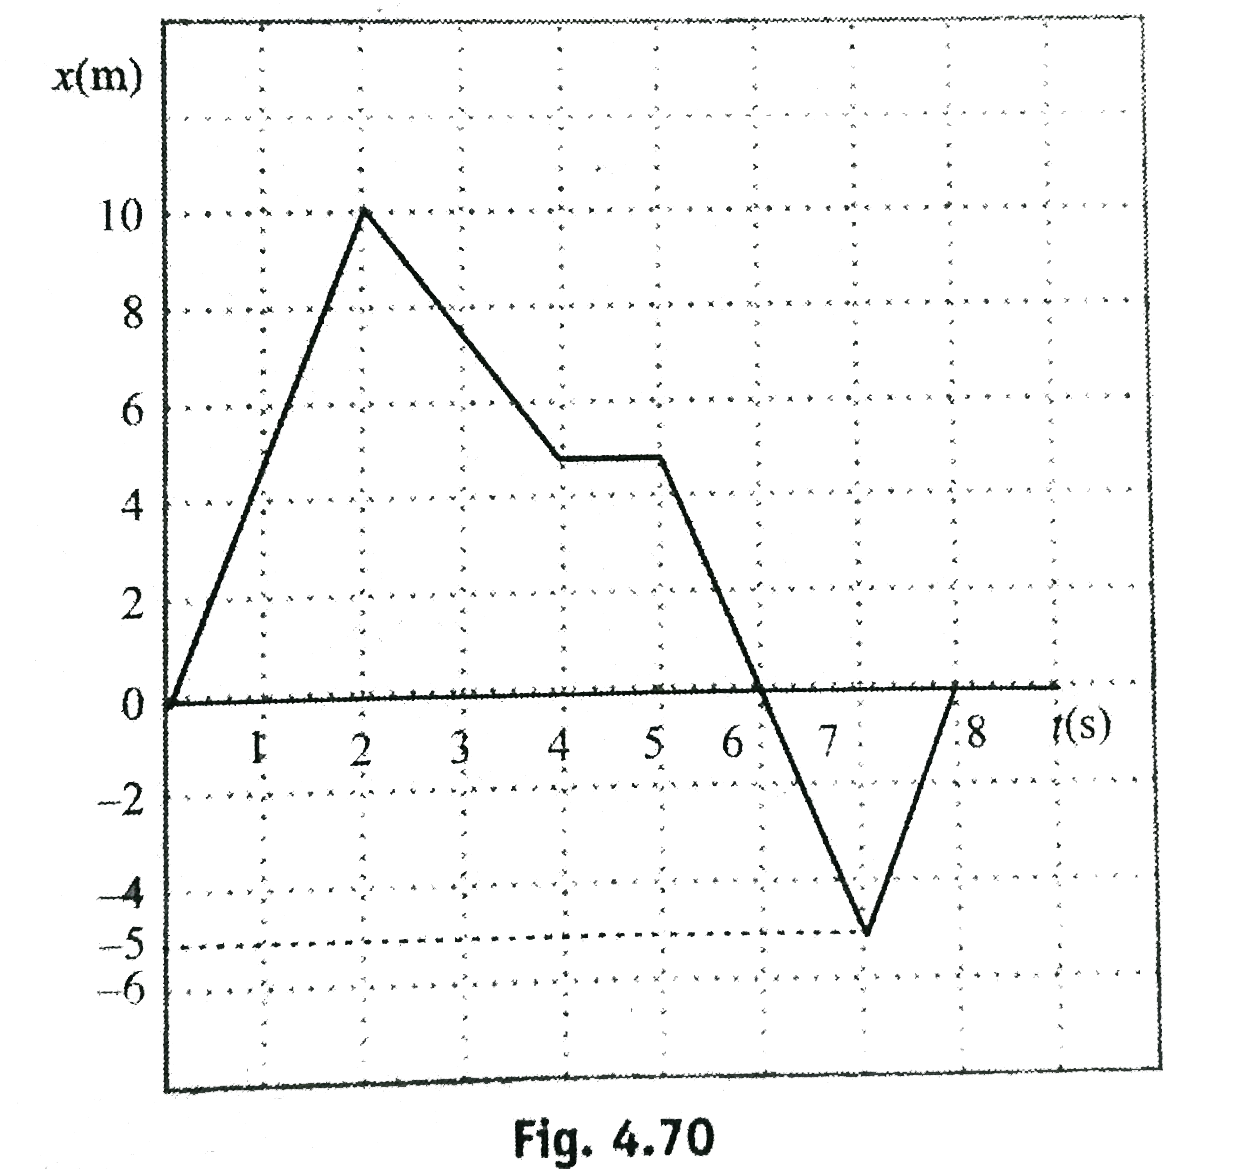 The position verus time graph time graph for a certain particle moving along the x-axis is shown in . Find the average velocity in the time intervals (a) 0 to 2s, (b) 2 s to 4 s, and (c) 4,s to 7 s,   .